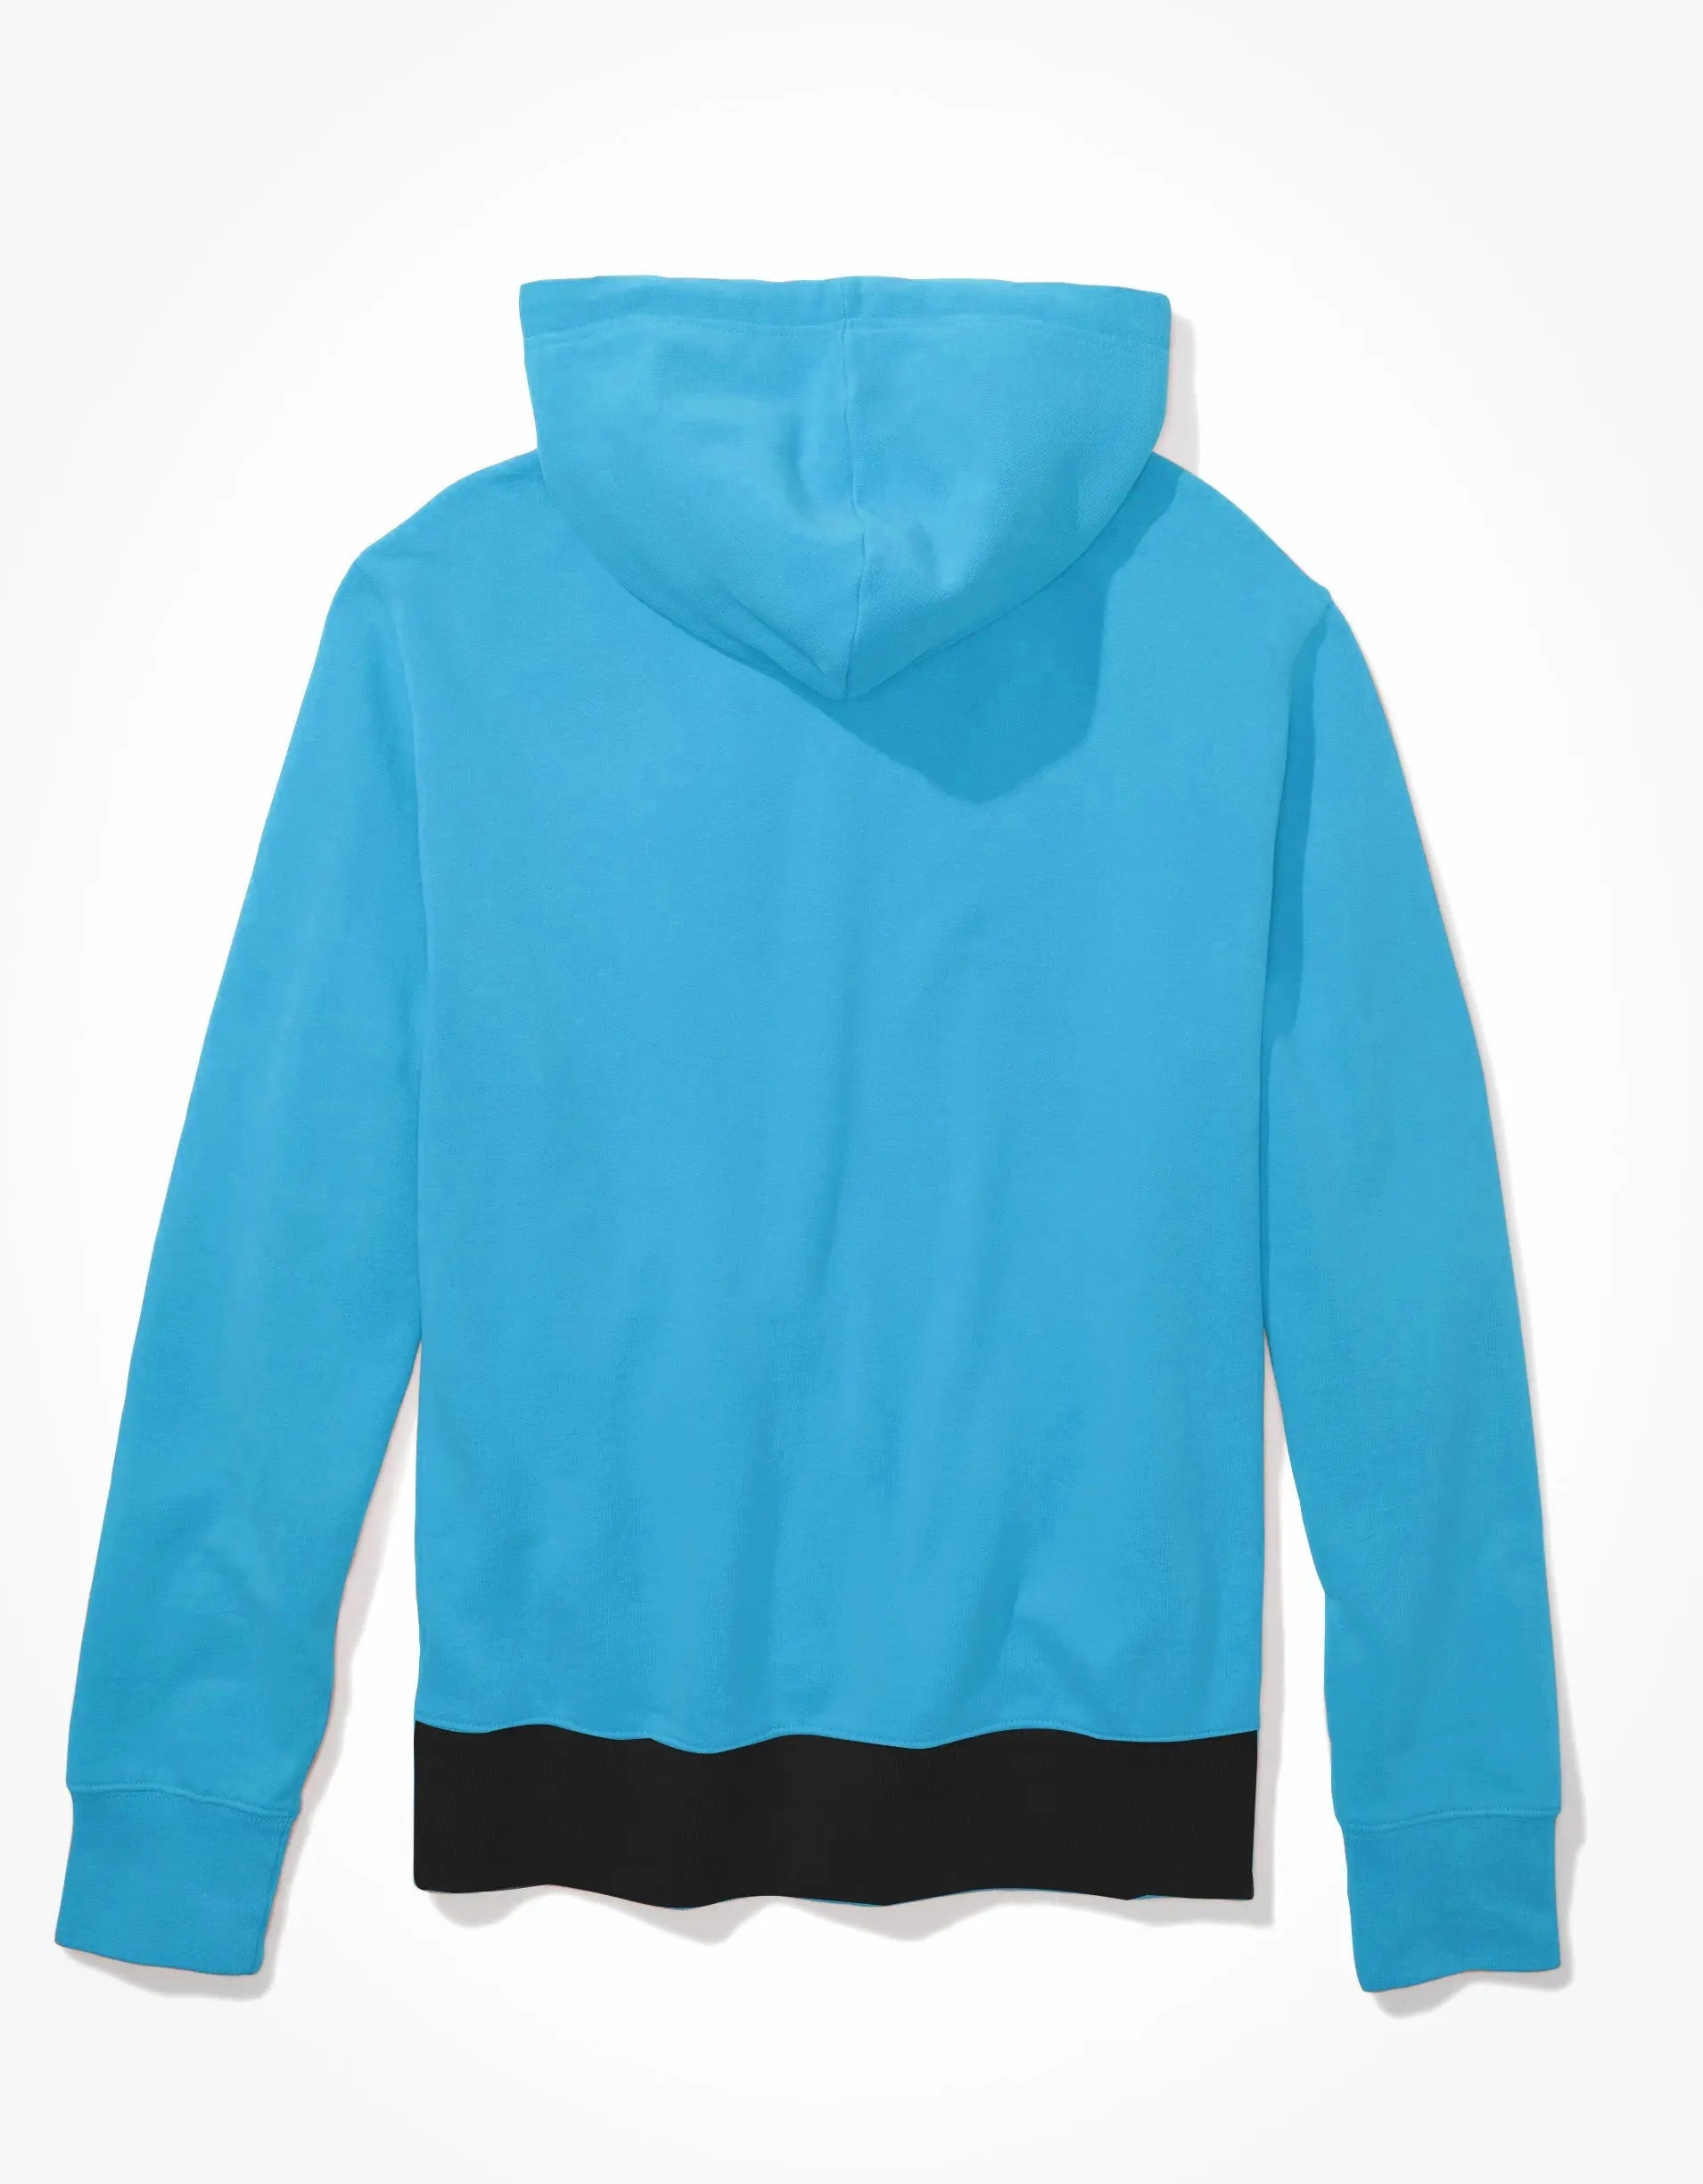 Next Fleece Pullover Hoodie For Men-Sky Blue with Black Panel-BE190